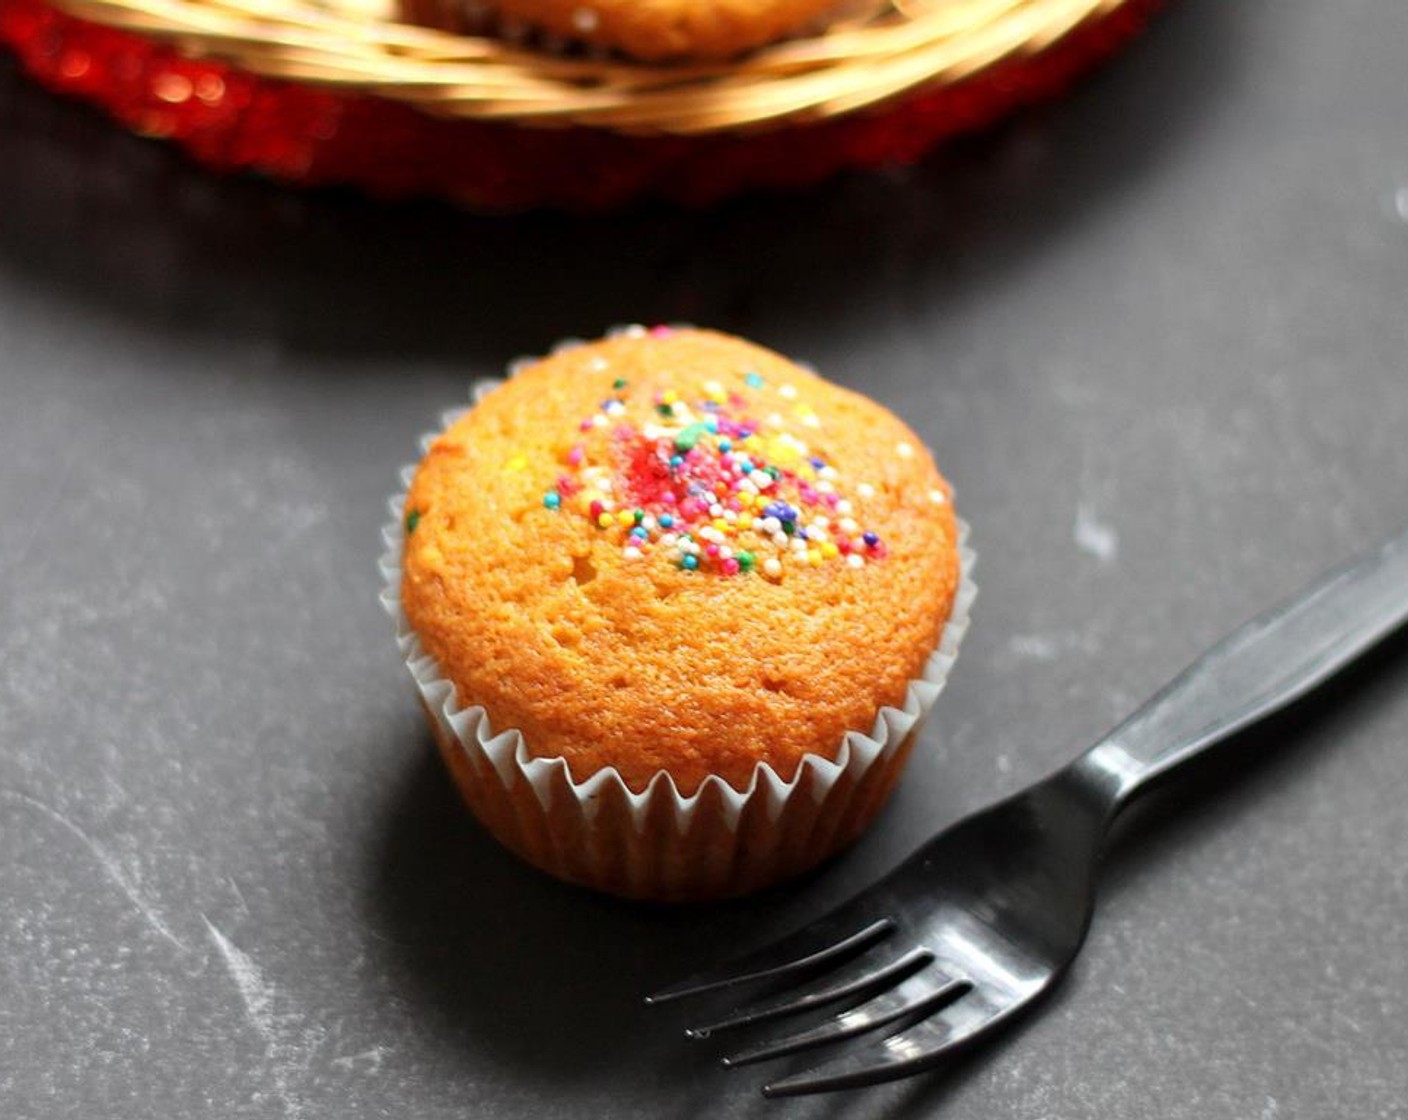 step 7 If using, decorate with Sprinkles (to taste) and bake for 15-20 minutes. To check if they are done, insert a toothpick; if it comes out clean the muffins are done. Let muffins cool before eating.